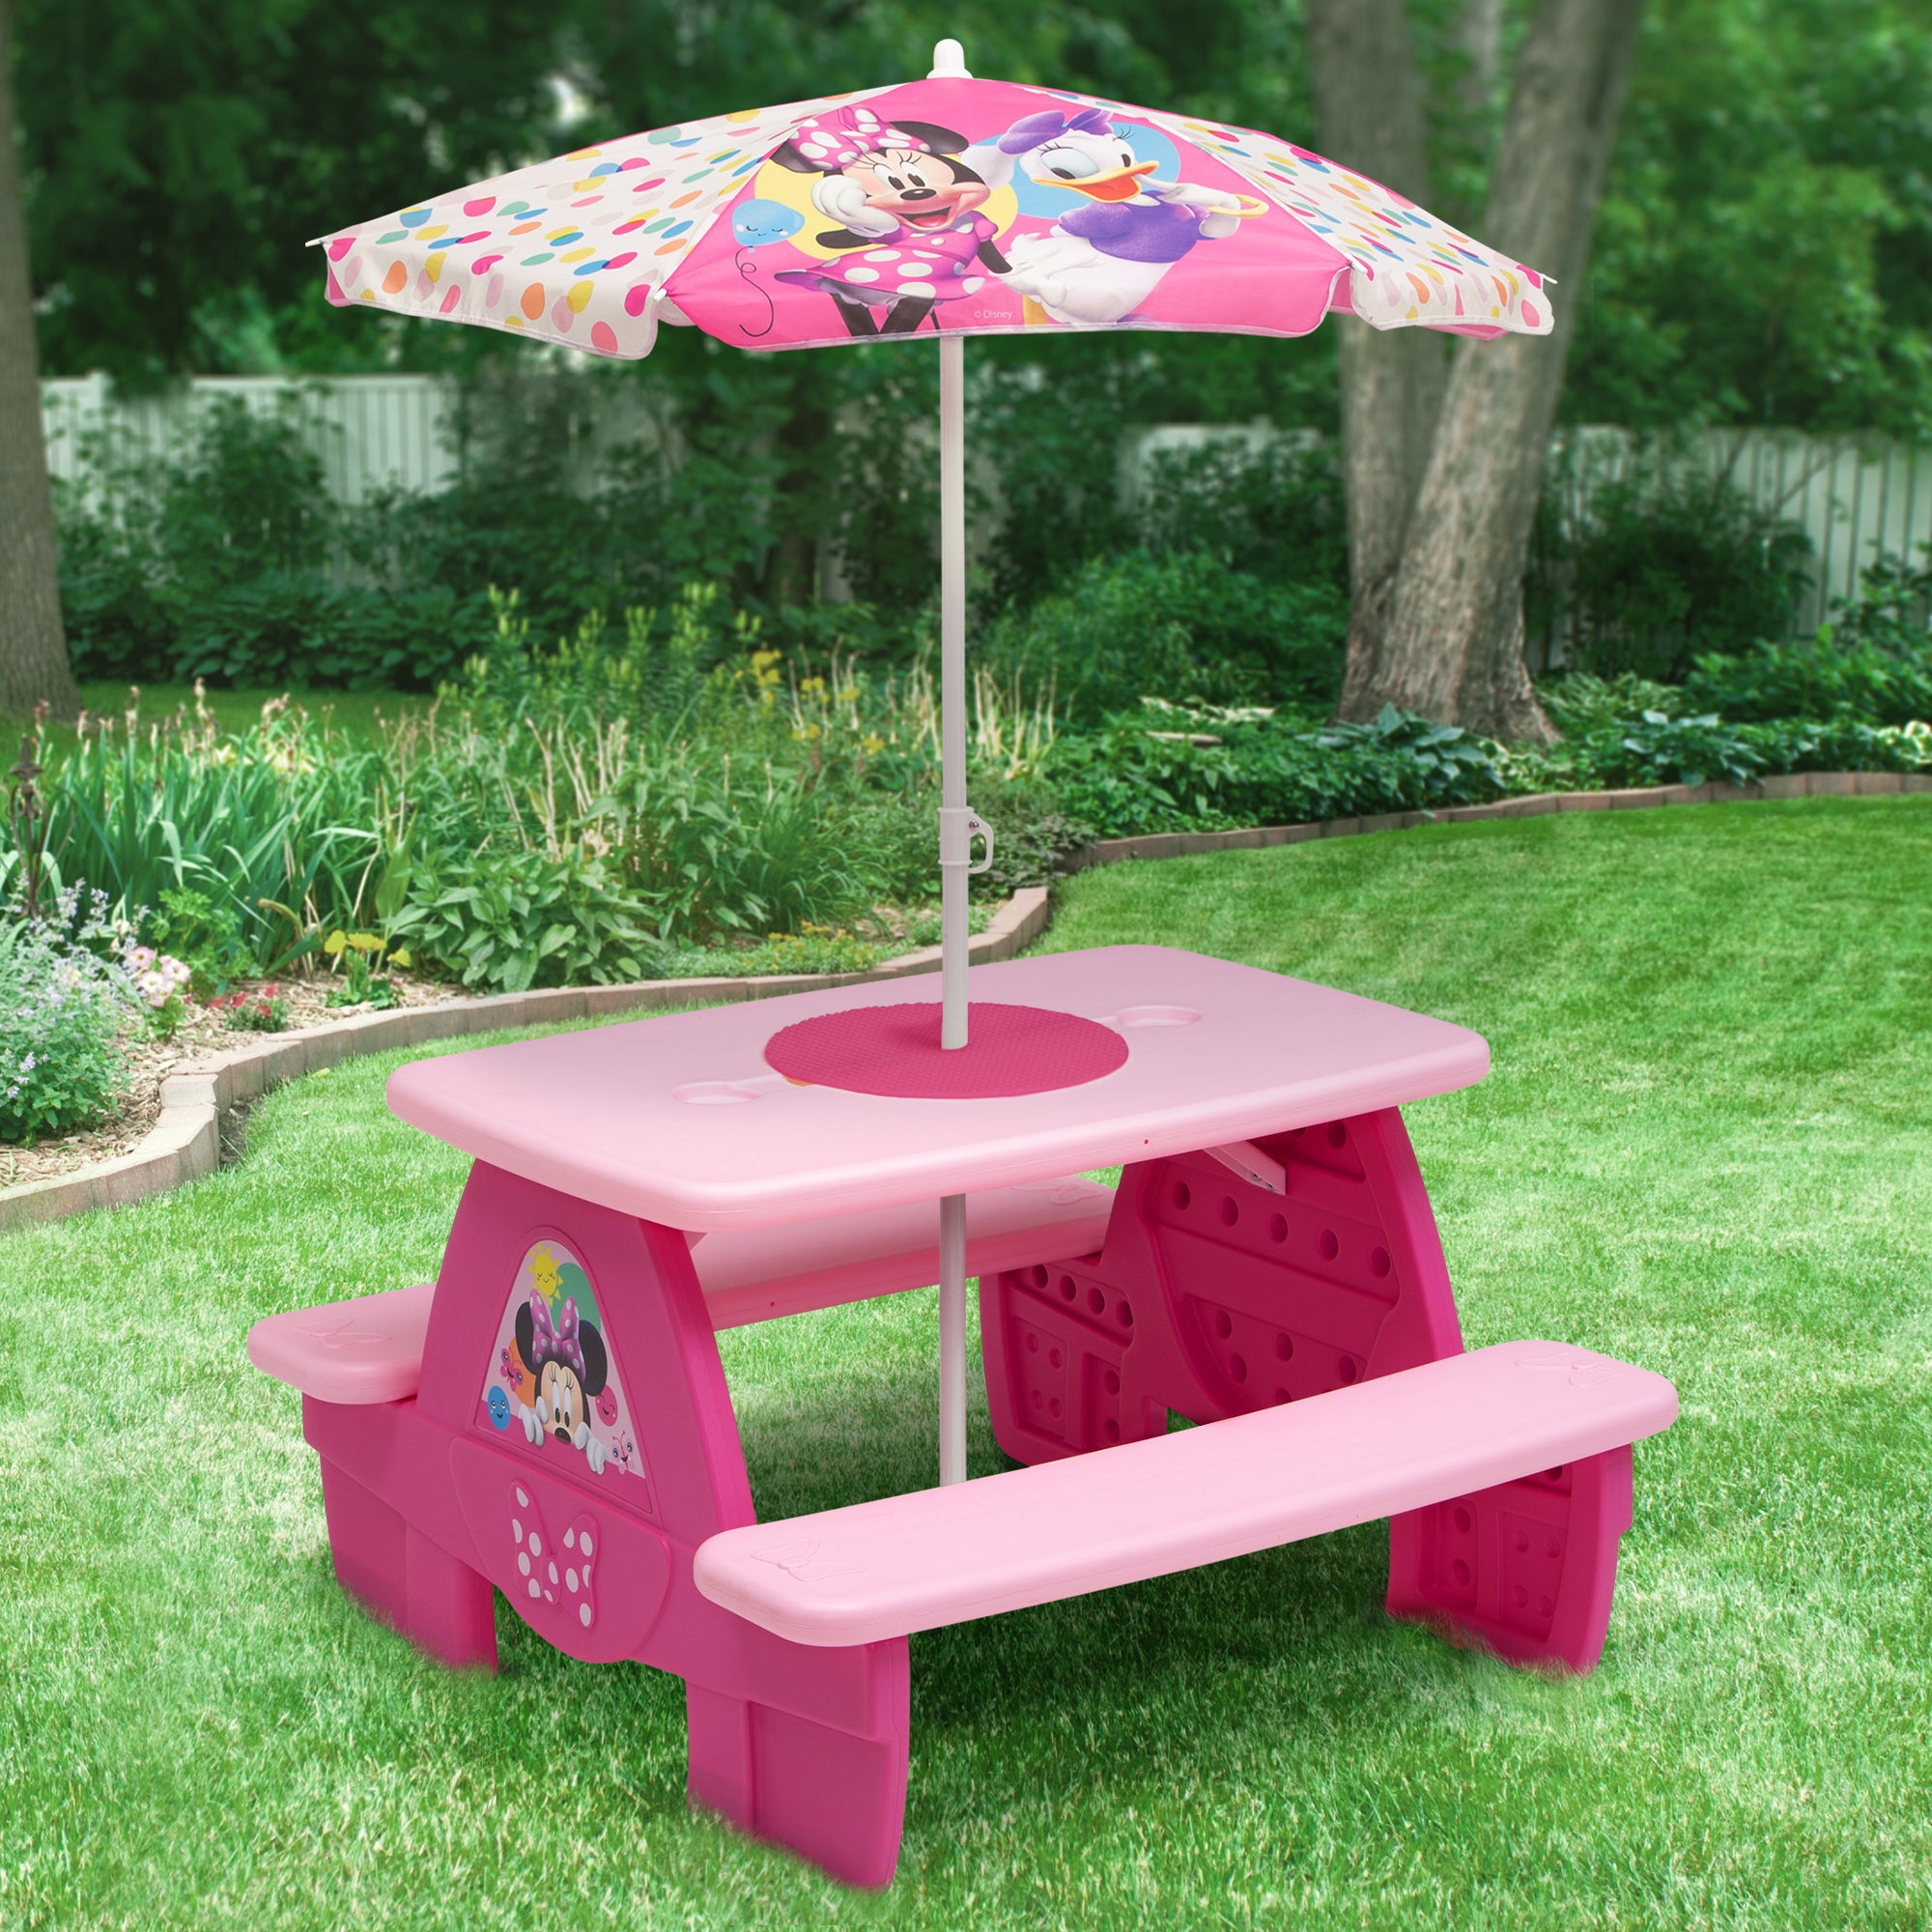  Delta Children 4 Seat Activity Picnic Table with